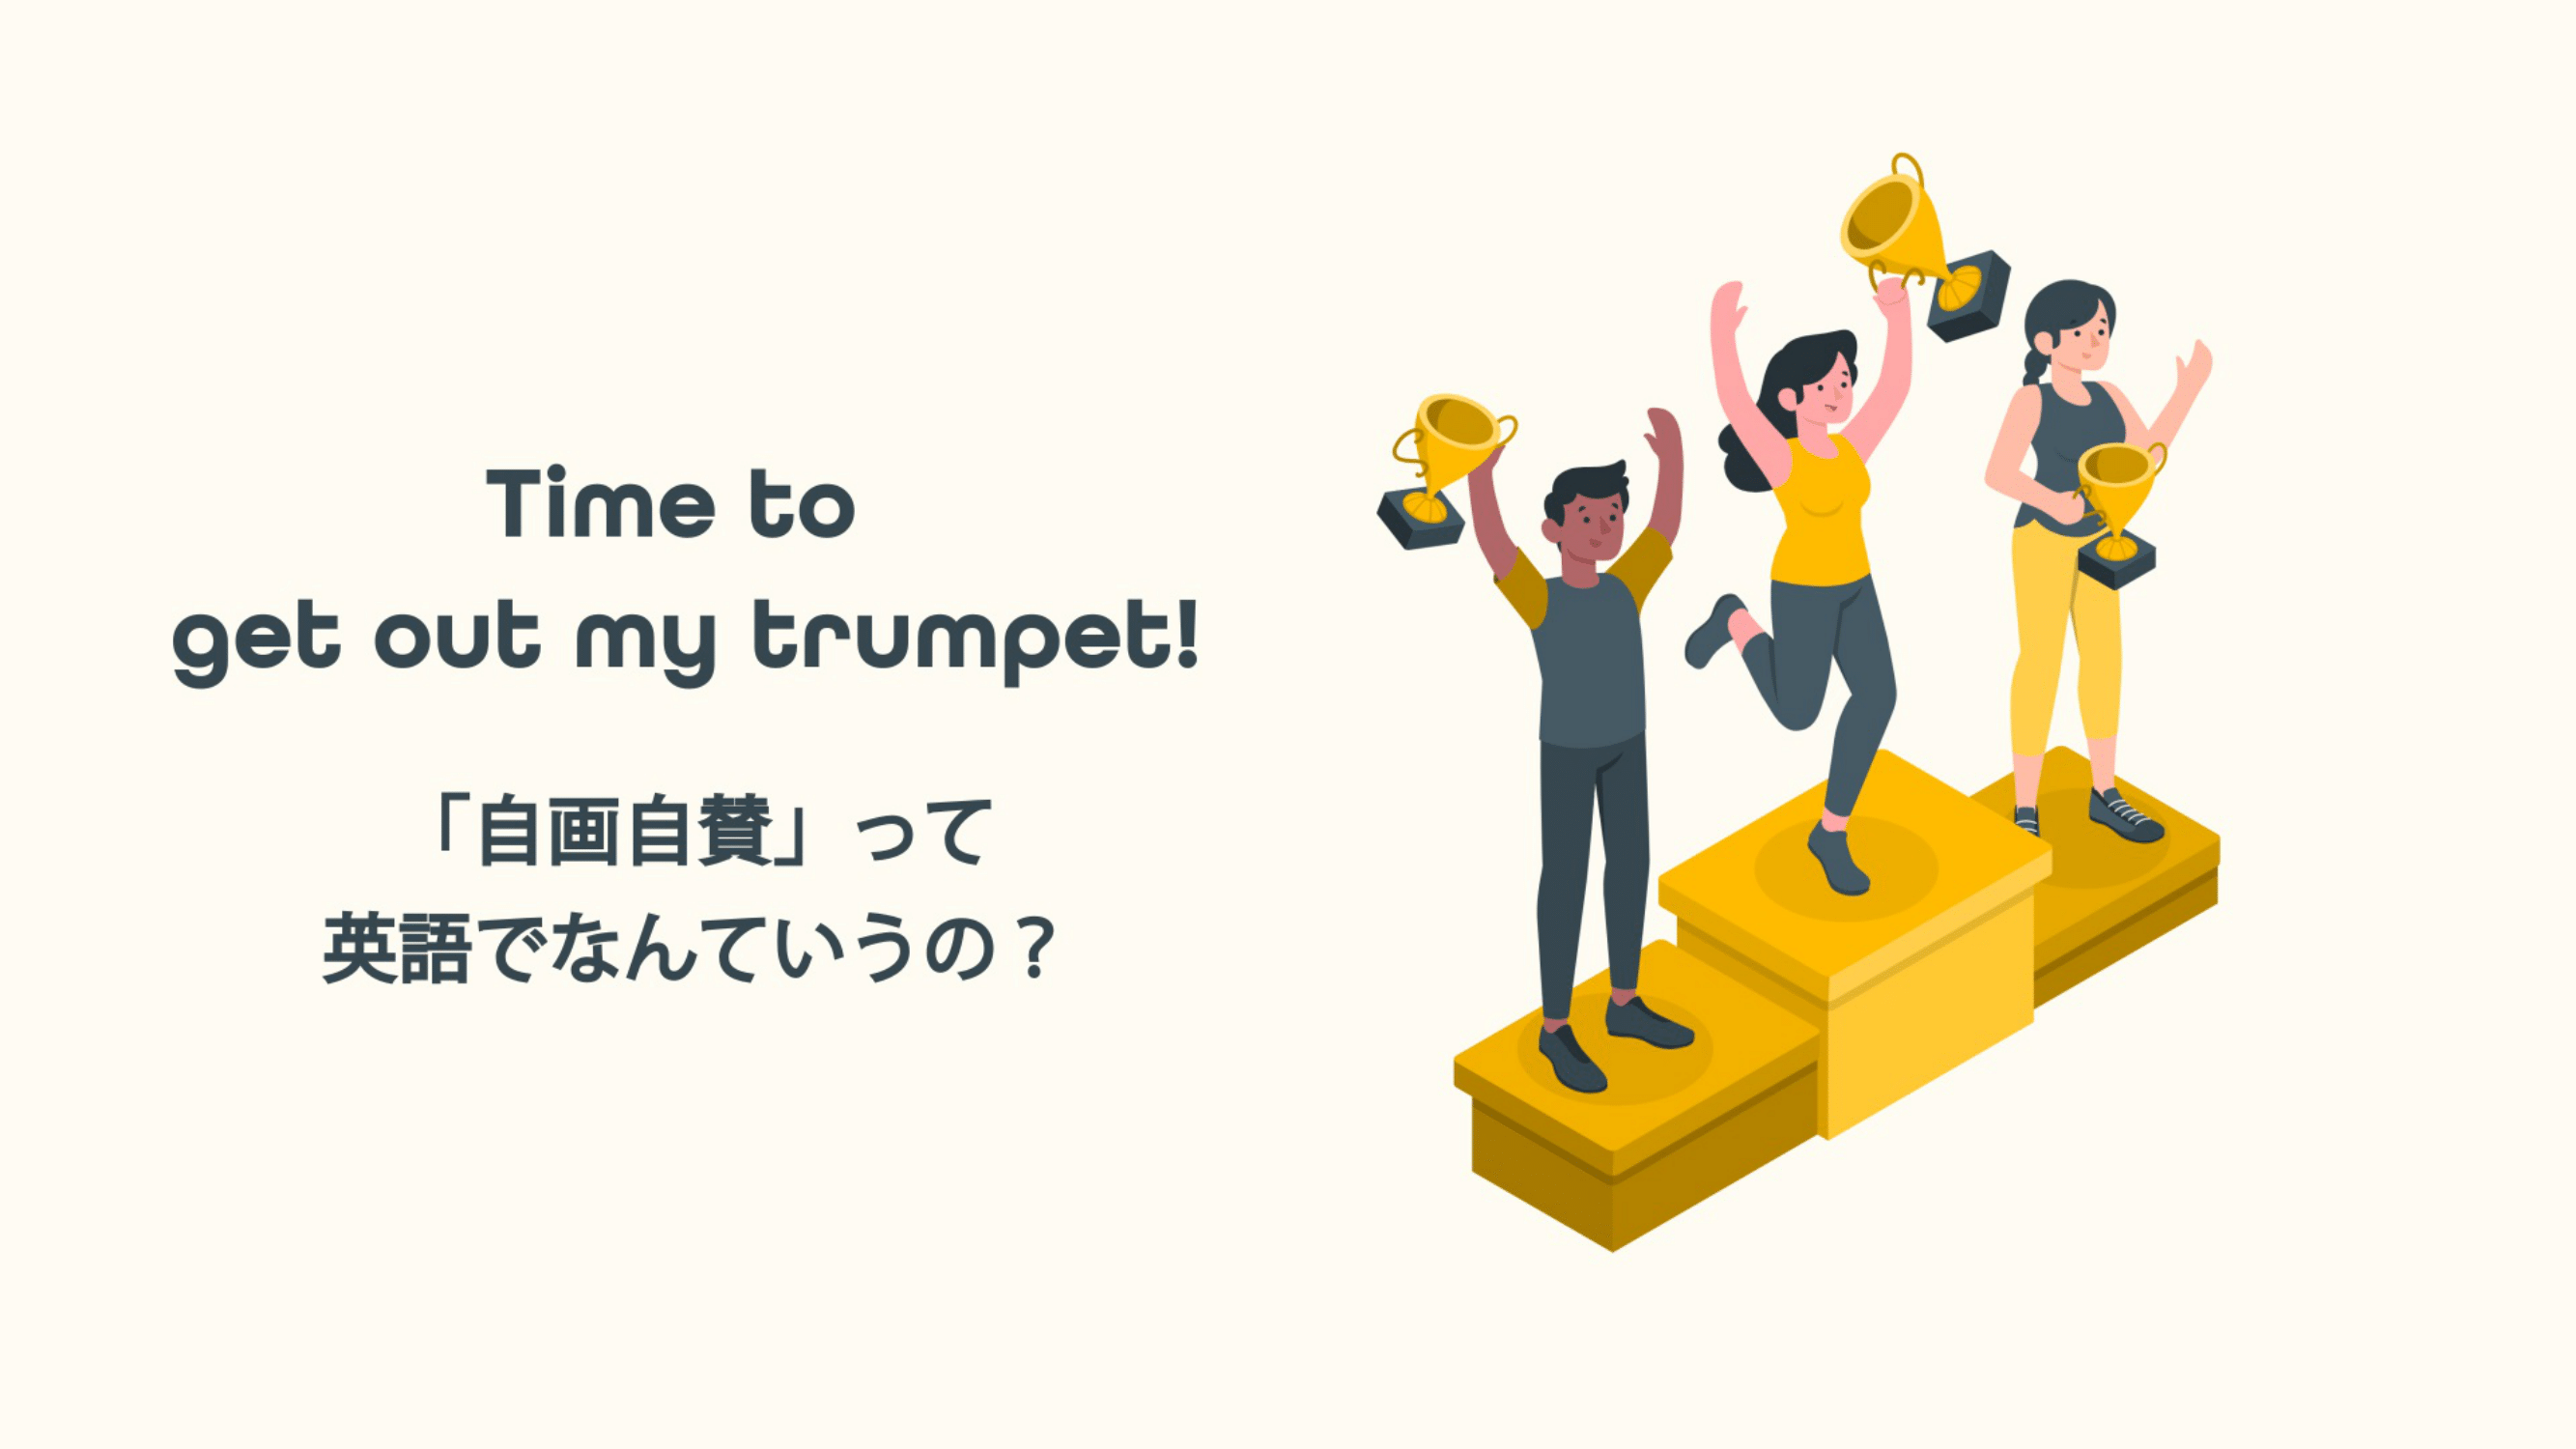 Featured image for “ Time to get out my trumpet! 「自画自賛」って英語でなんていうの？”